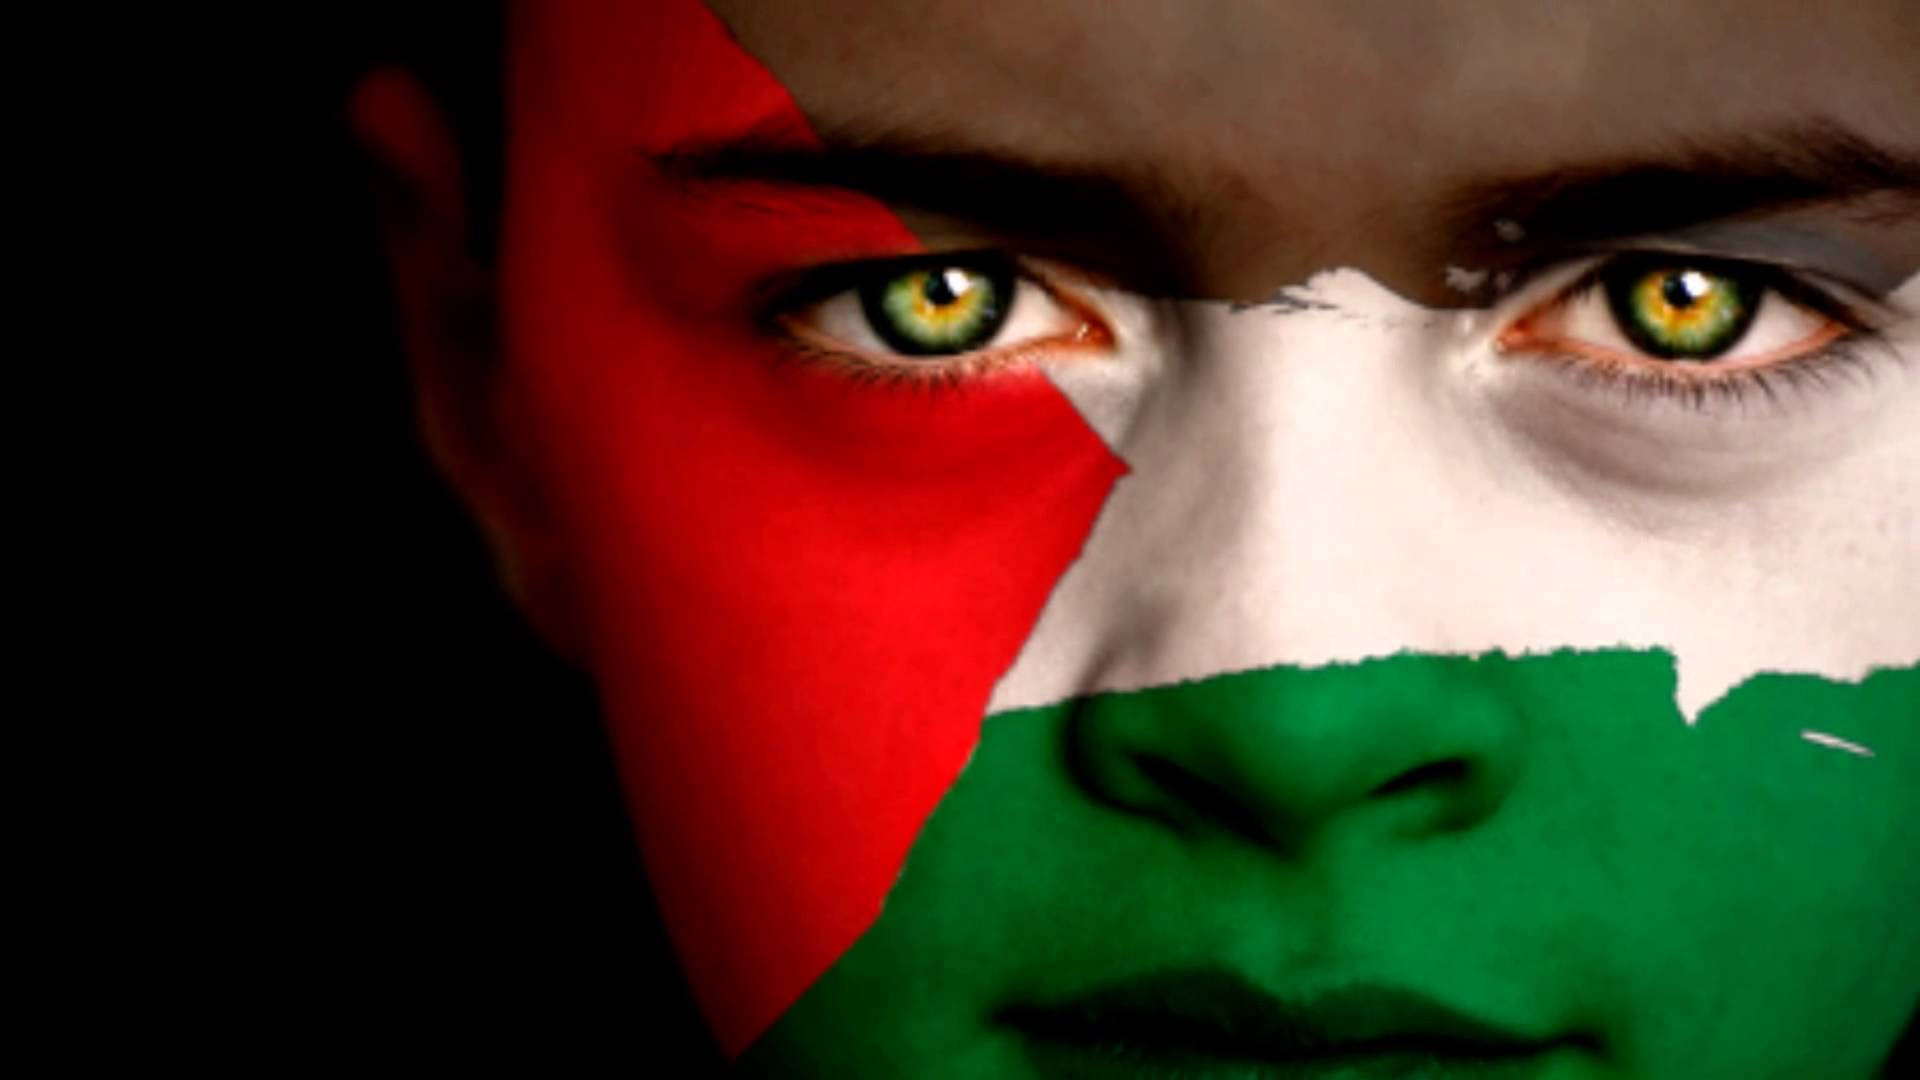 Passionate Supporter with Painted Palestine Flag on Face Wallpaper